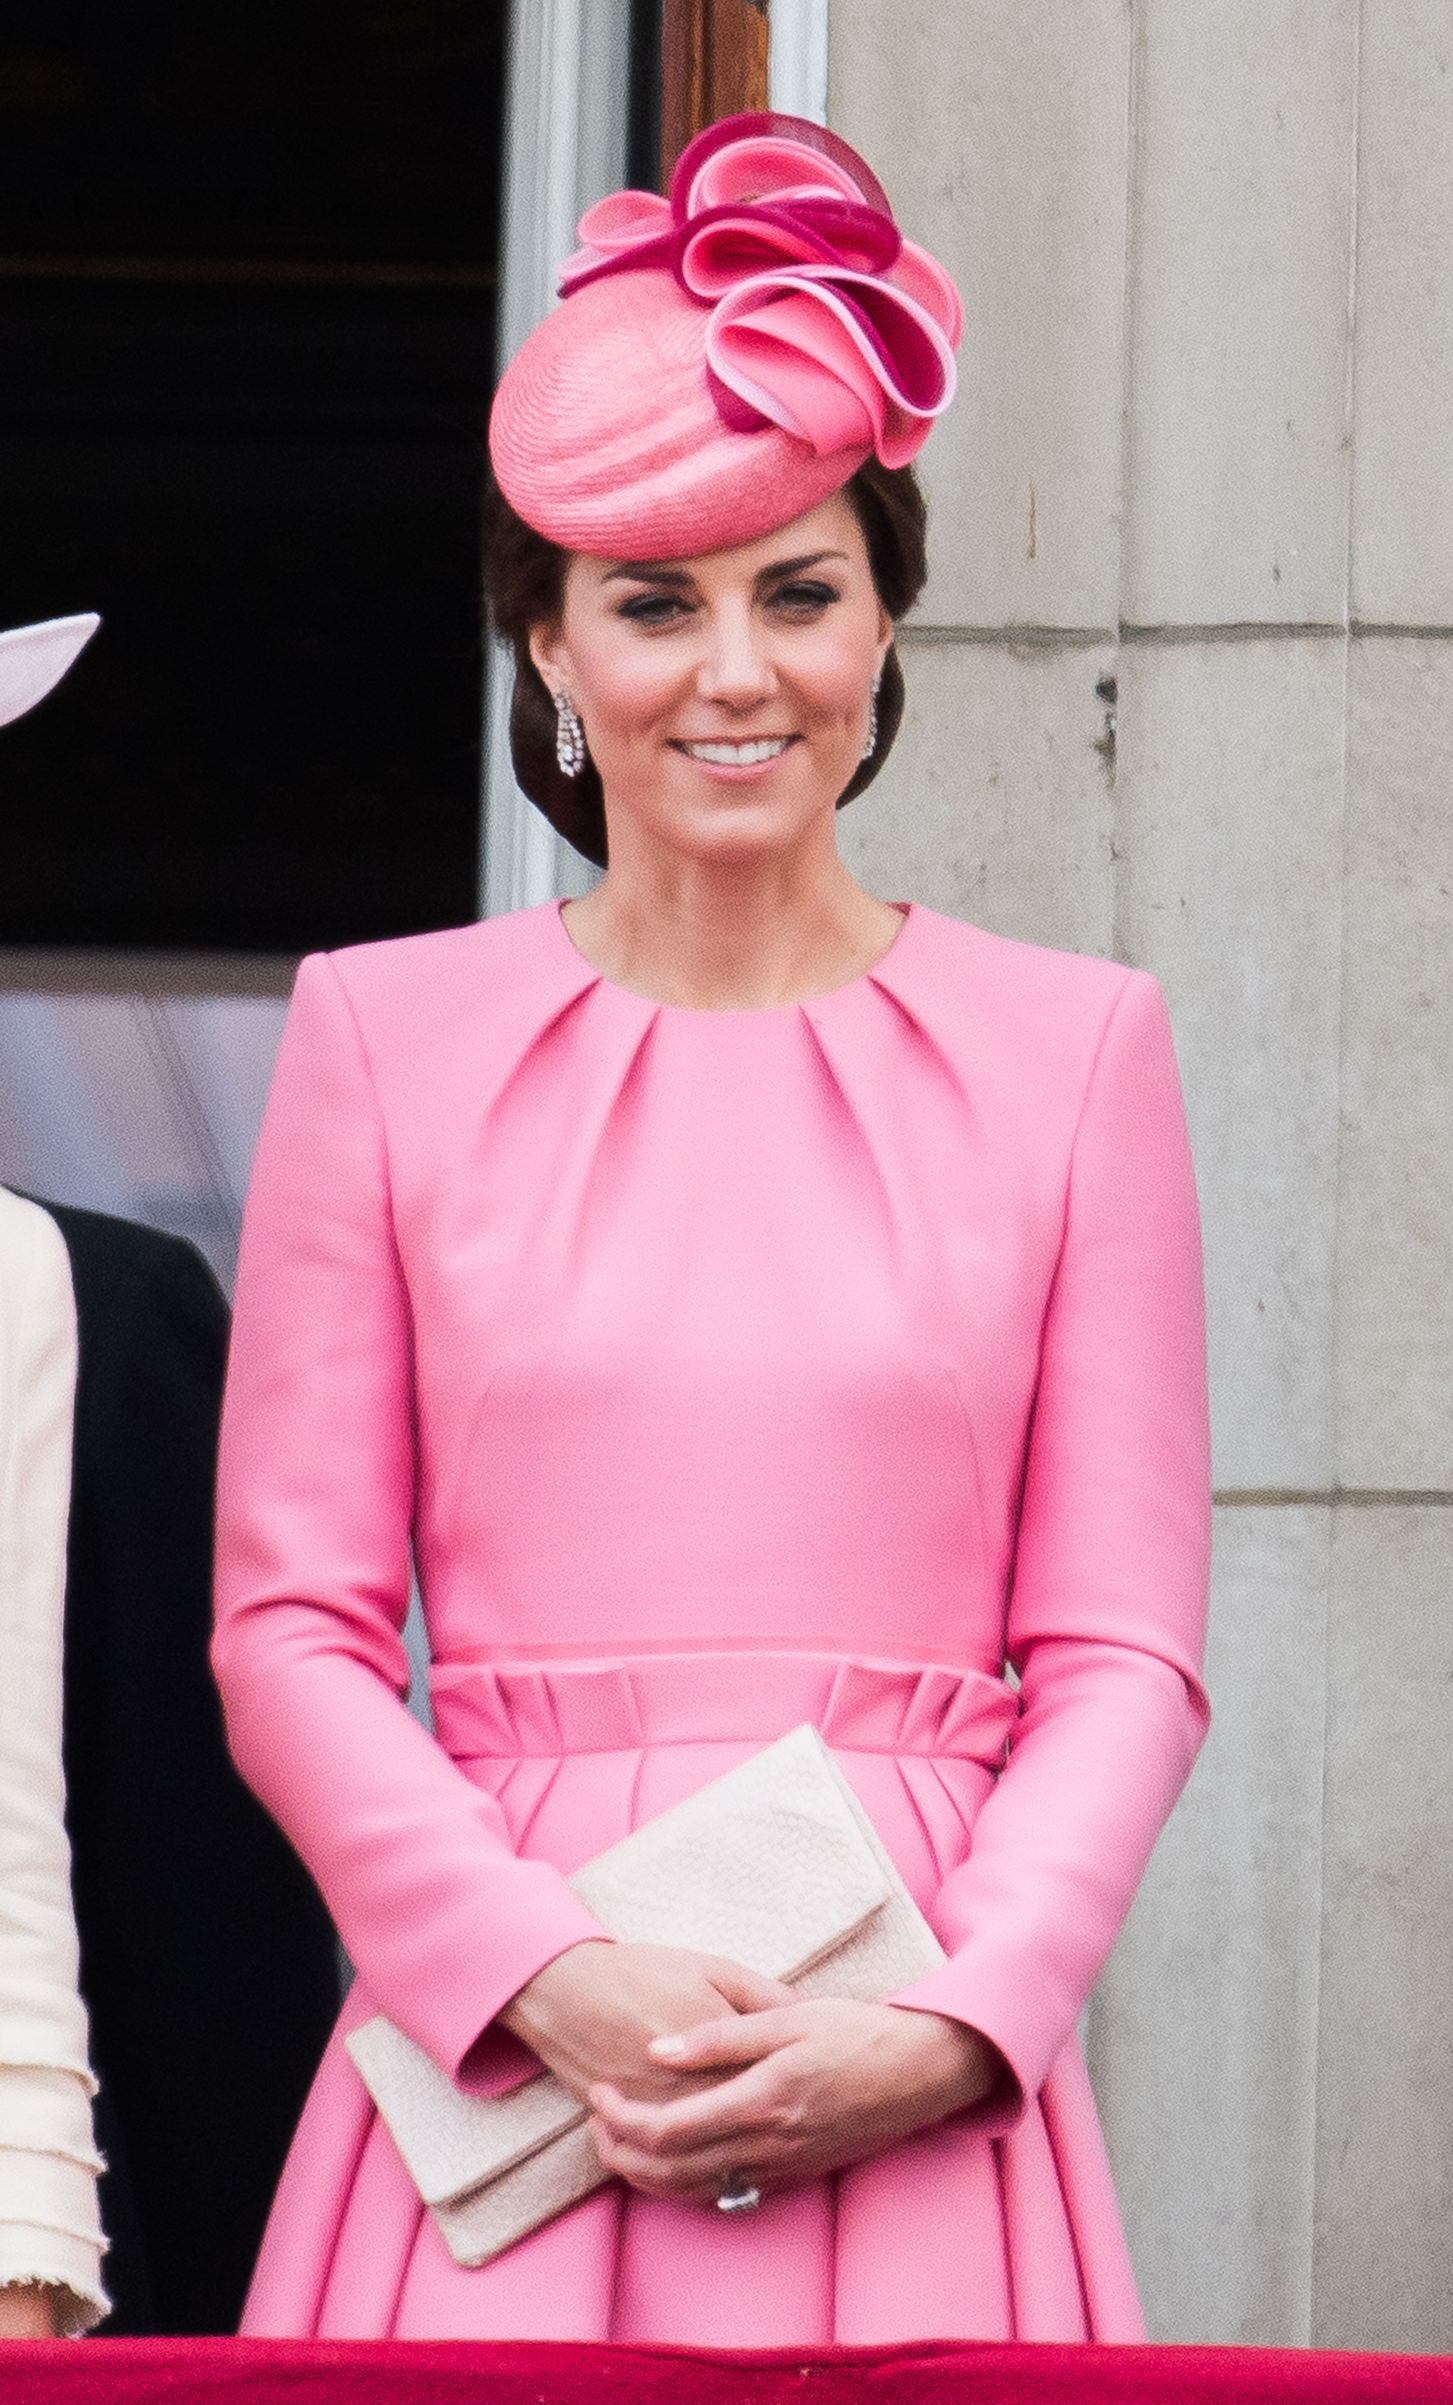 Catherine, Duchess of Cambridge, stands on the balcony of Buckingham Palace at the annual Trooping the Colour parade in London on June 17, 2017.